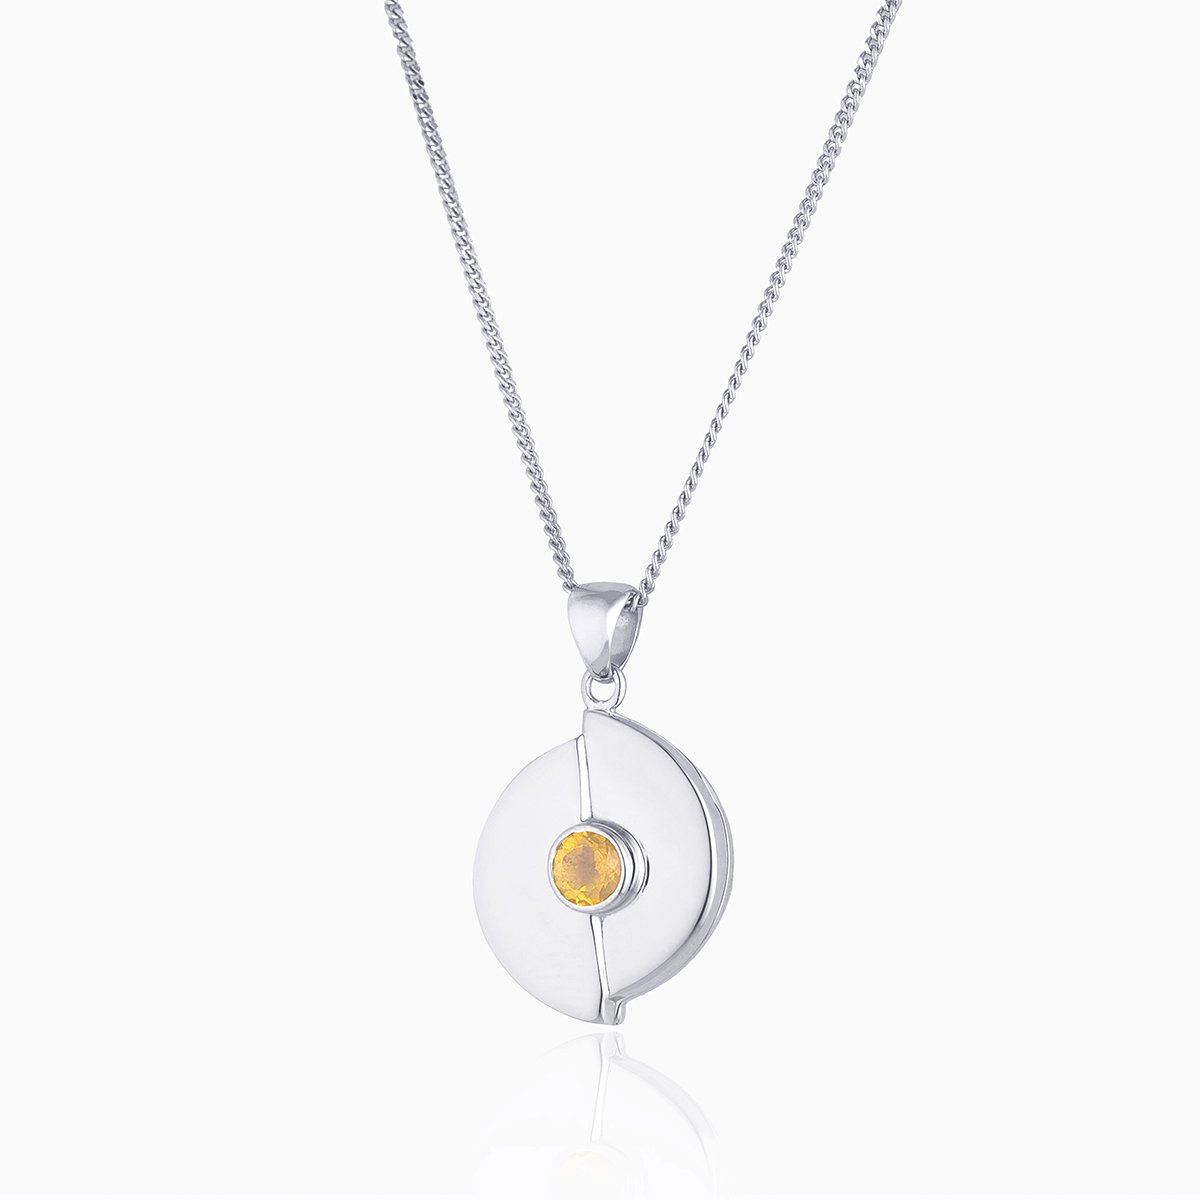 Circular 9 ct white gold locket set with a yellow citrine on a 9 ct white gold curb chain